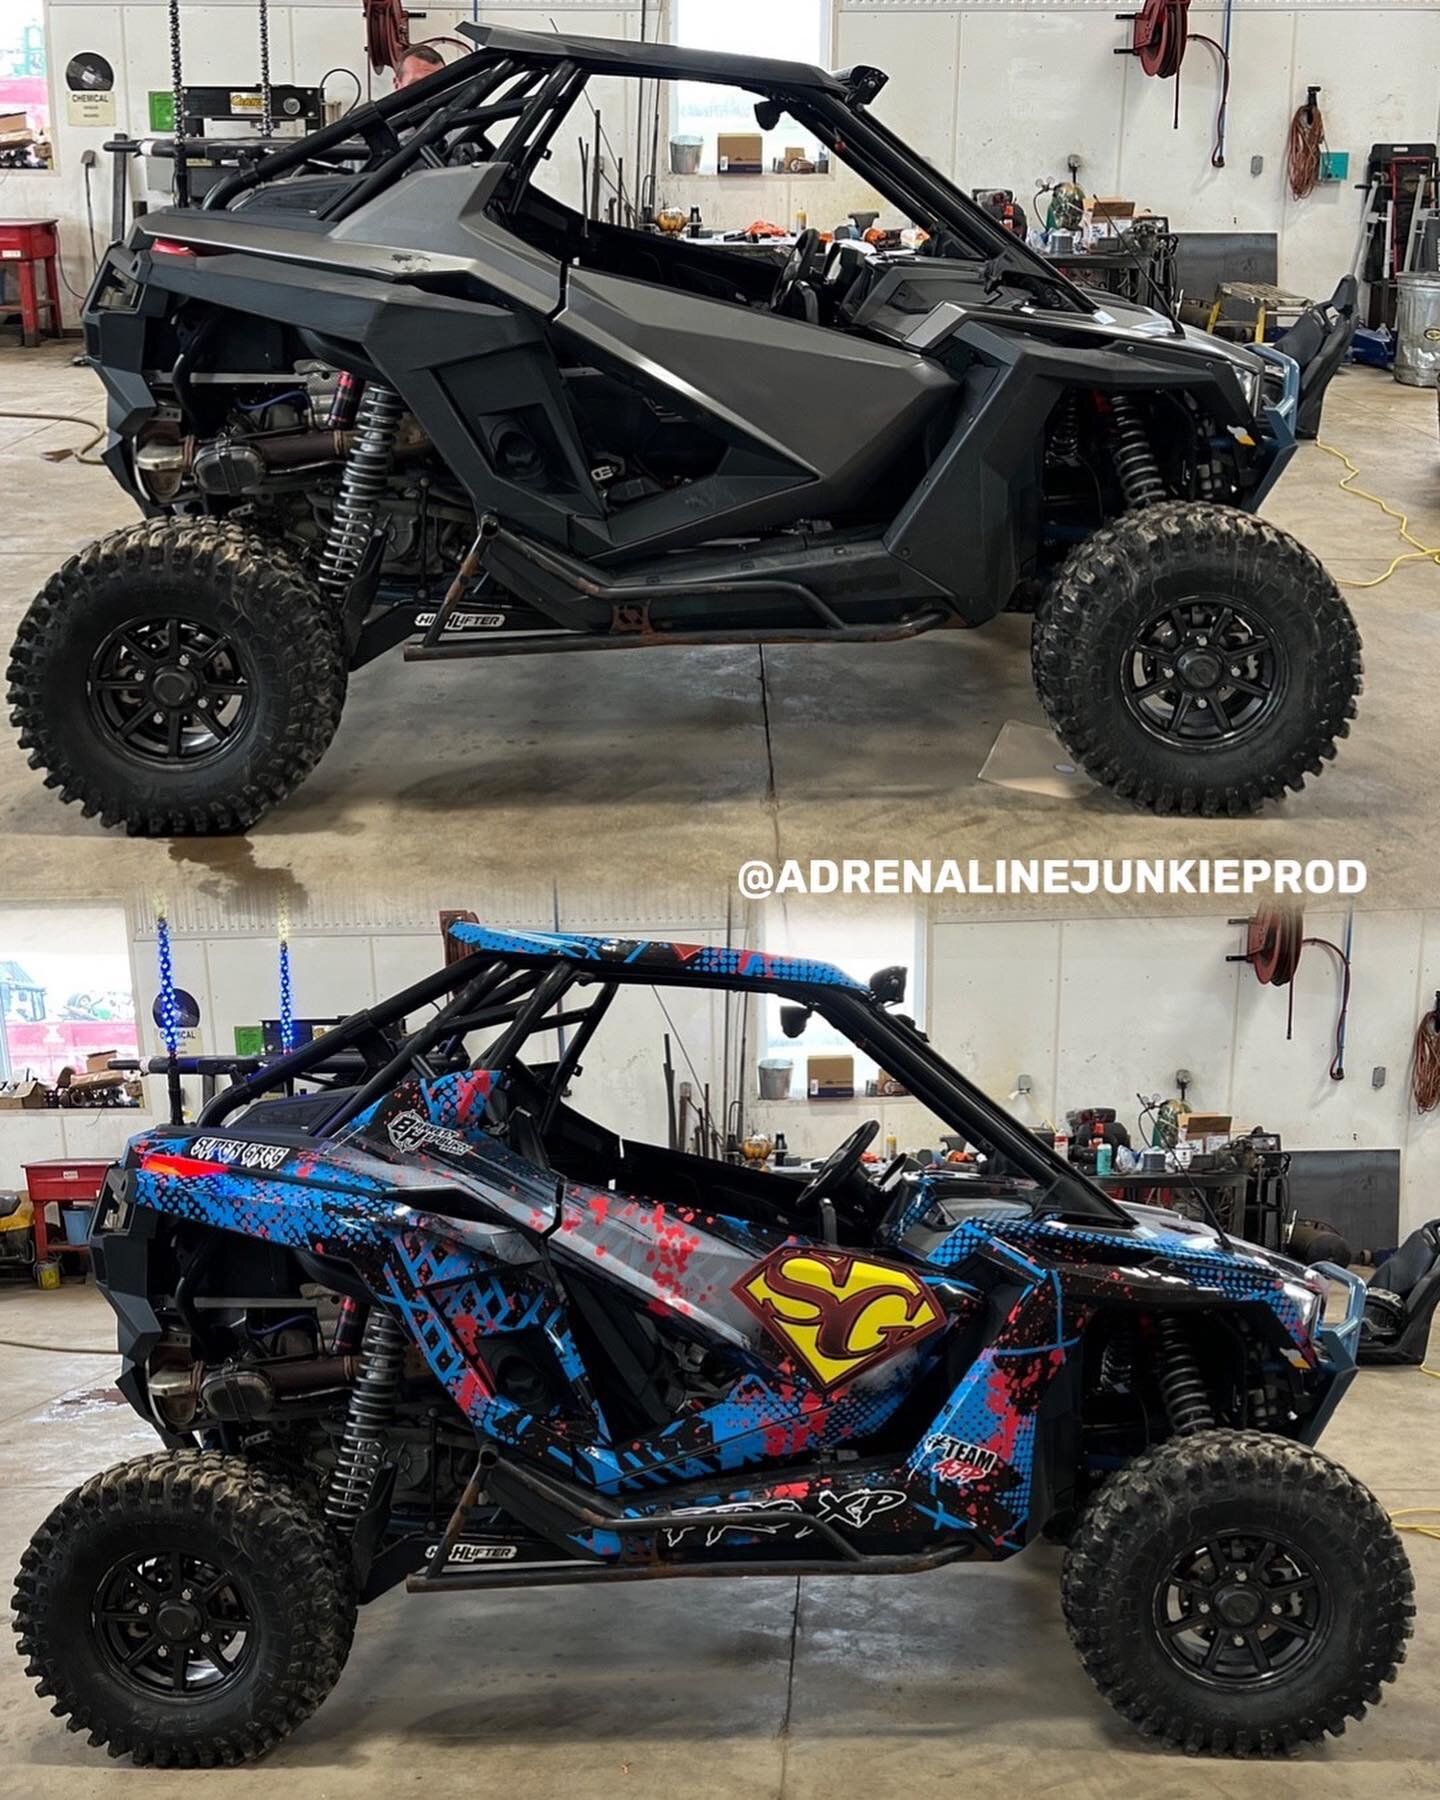 #SuperGreg just got more super! Check out this badass custom wrap from @barrett_hepburn_design It turned out awesome! It&rsquo;s like a superhero outfit and cape for SG&rsquo;s RZR! Now we just need to get him a cape to ride in and see what he does n